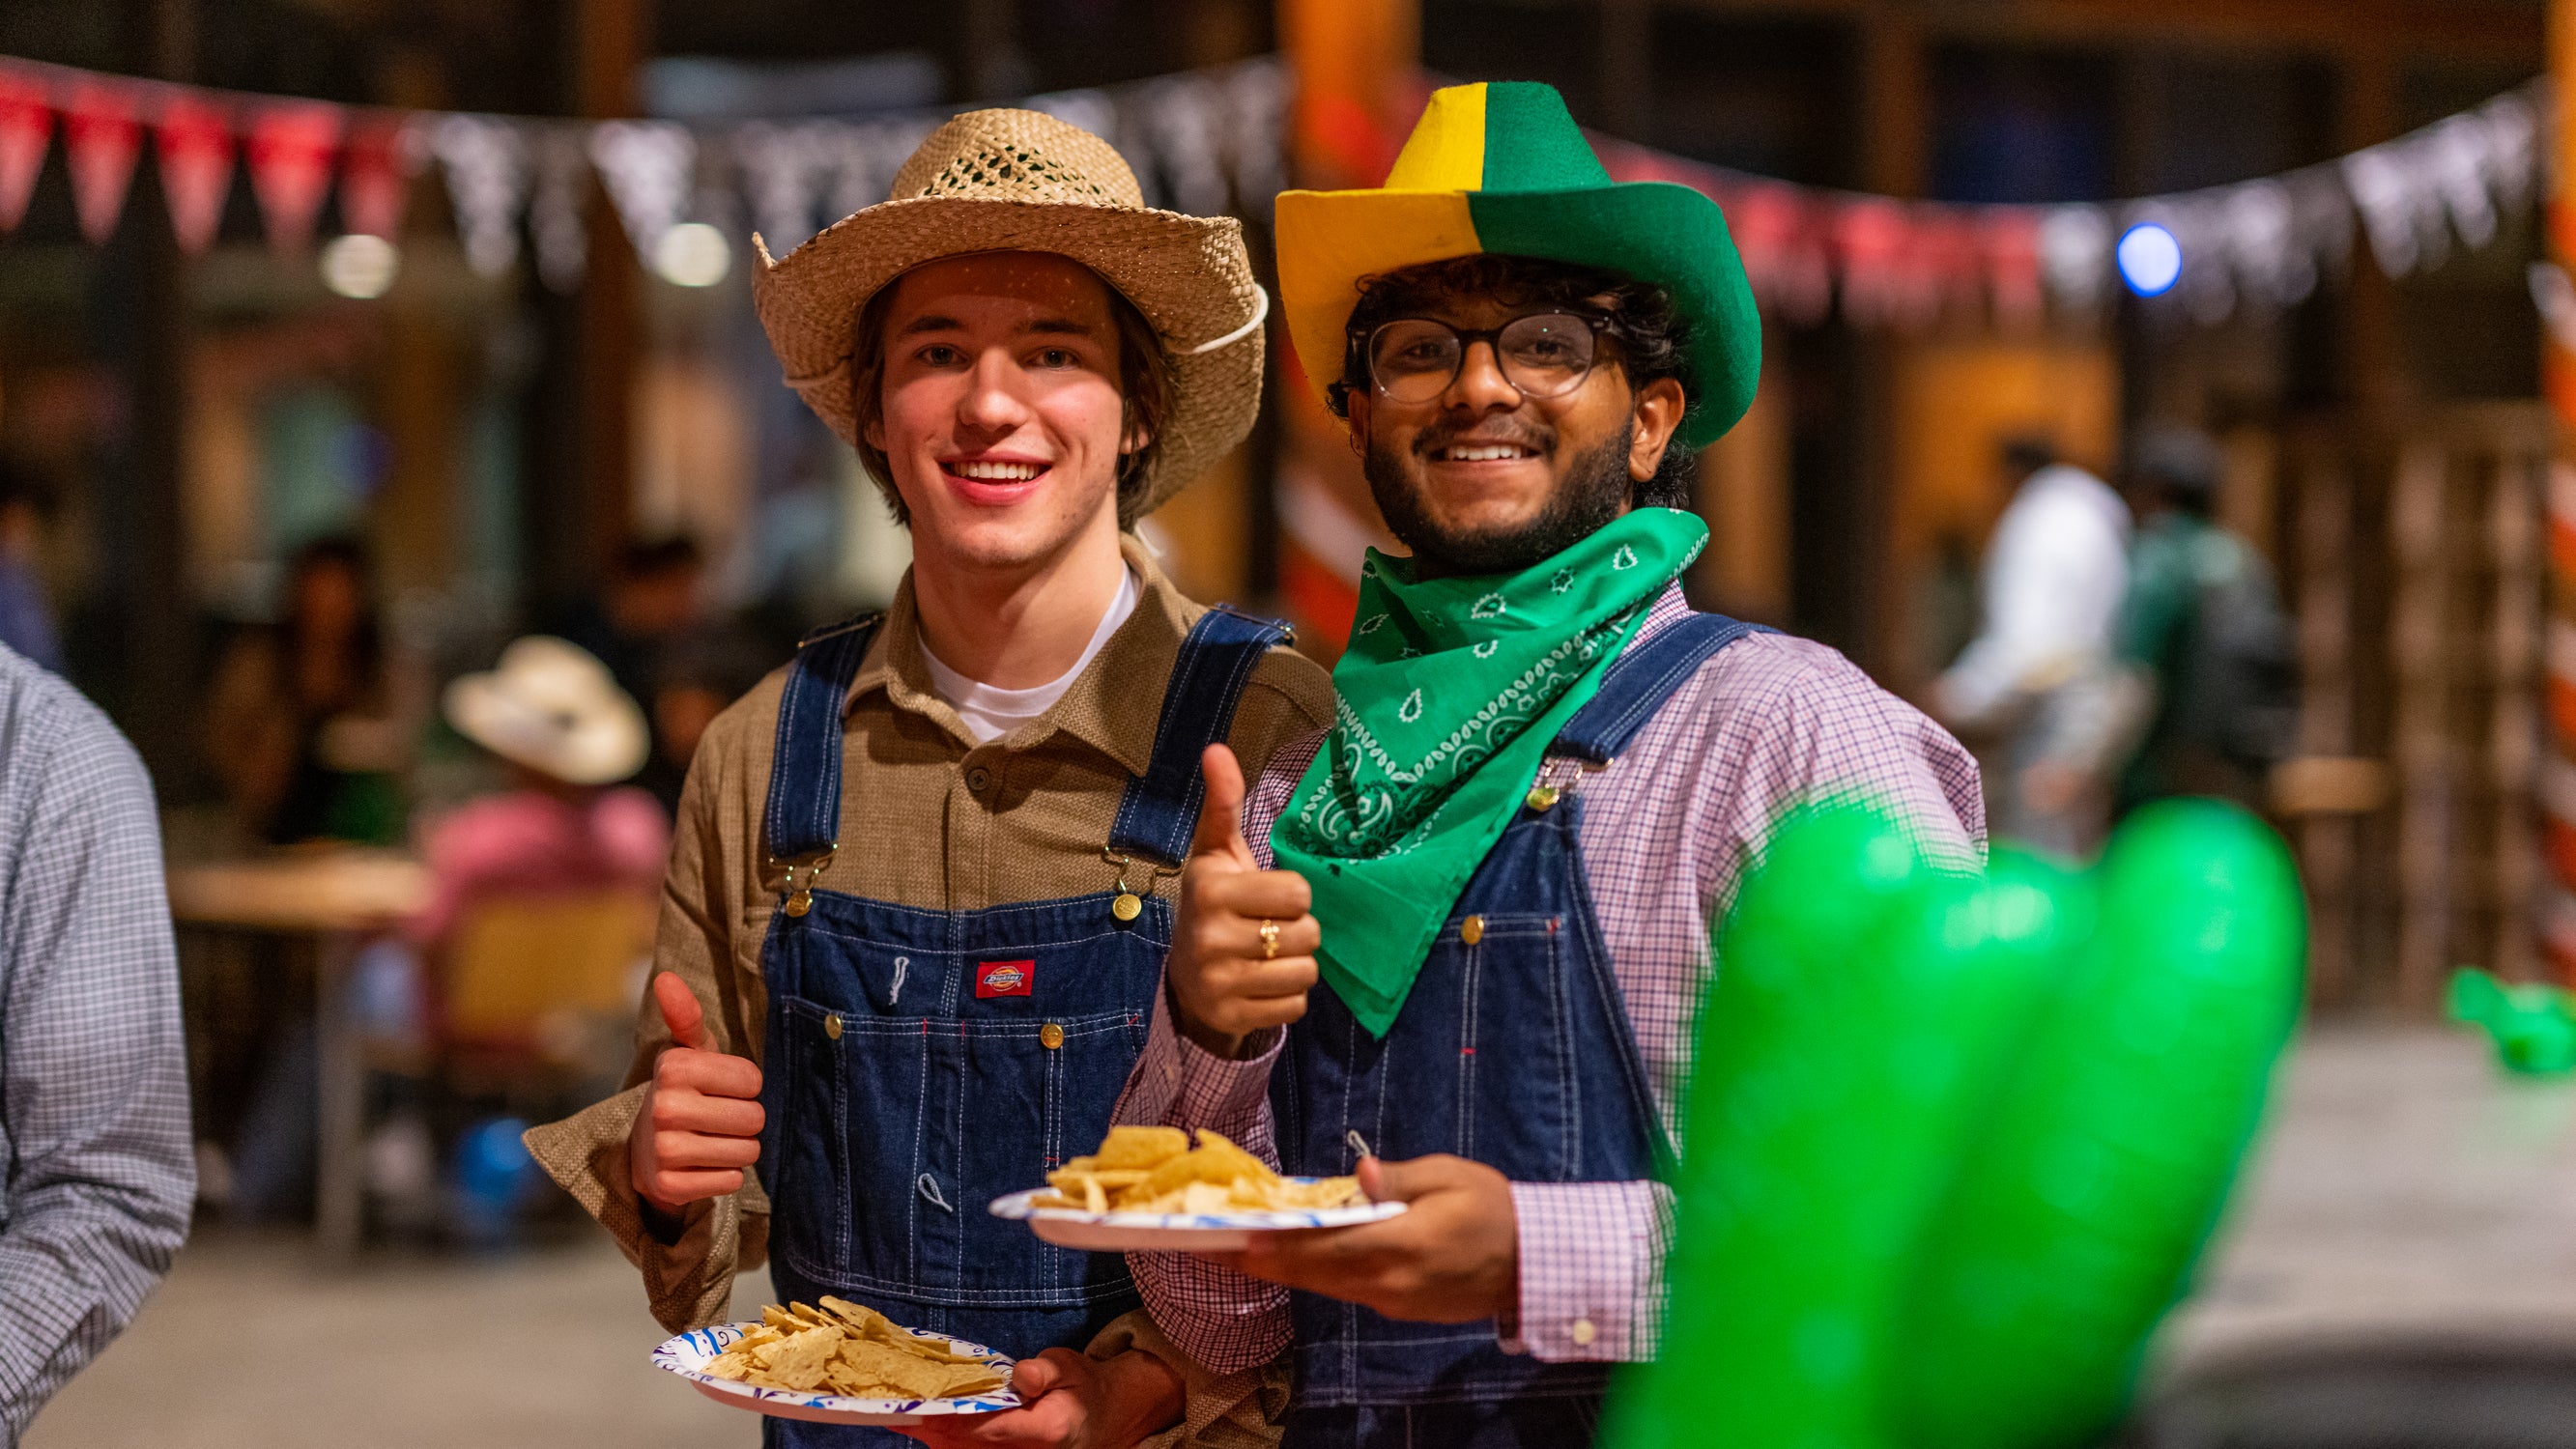 Two male students wearing cowboy hats and denim overalls holding plates of food and a thumbs up, smiling at the camera.